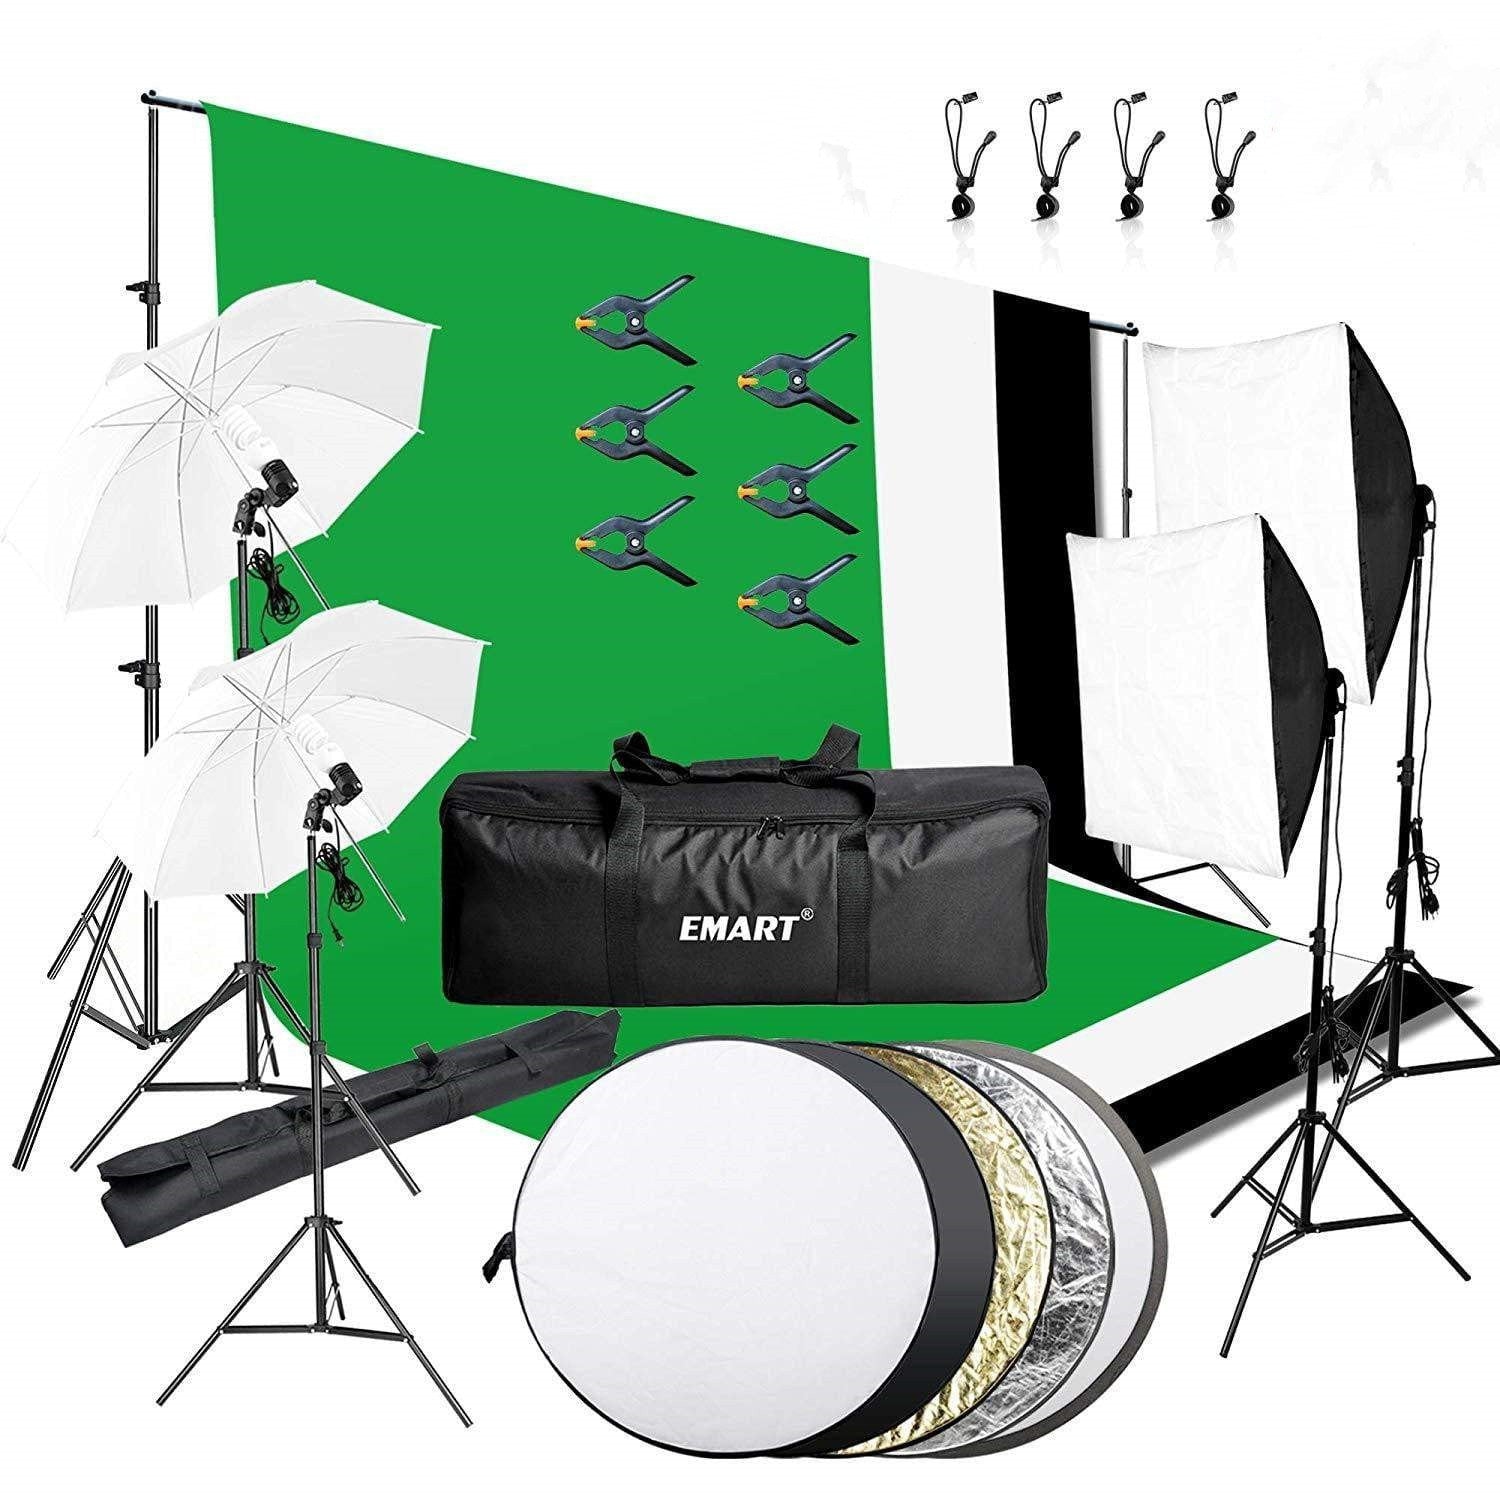 EMART 8.5 x 10 ft Backdrop Support System, with Umbrella Softbox Lighting Set